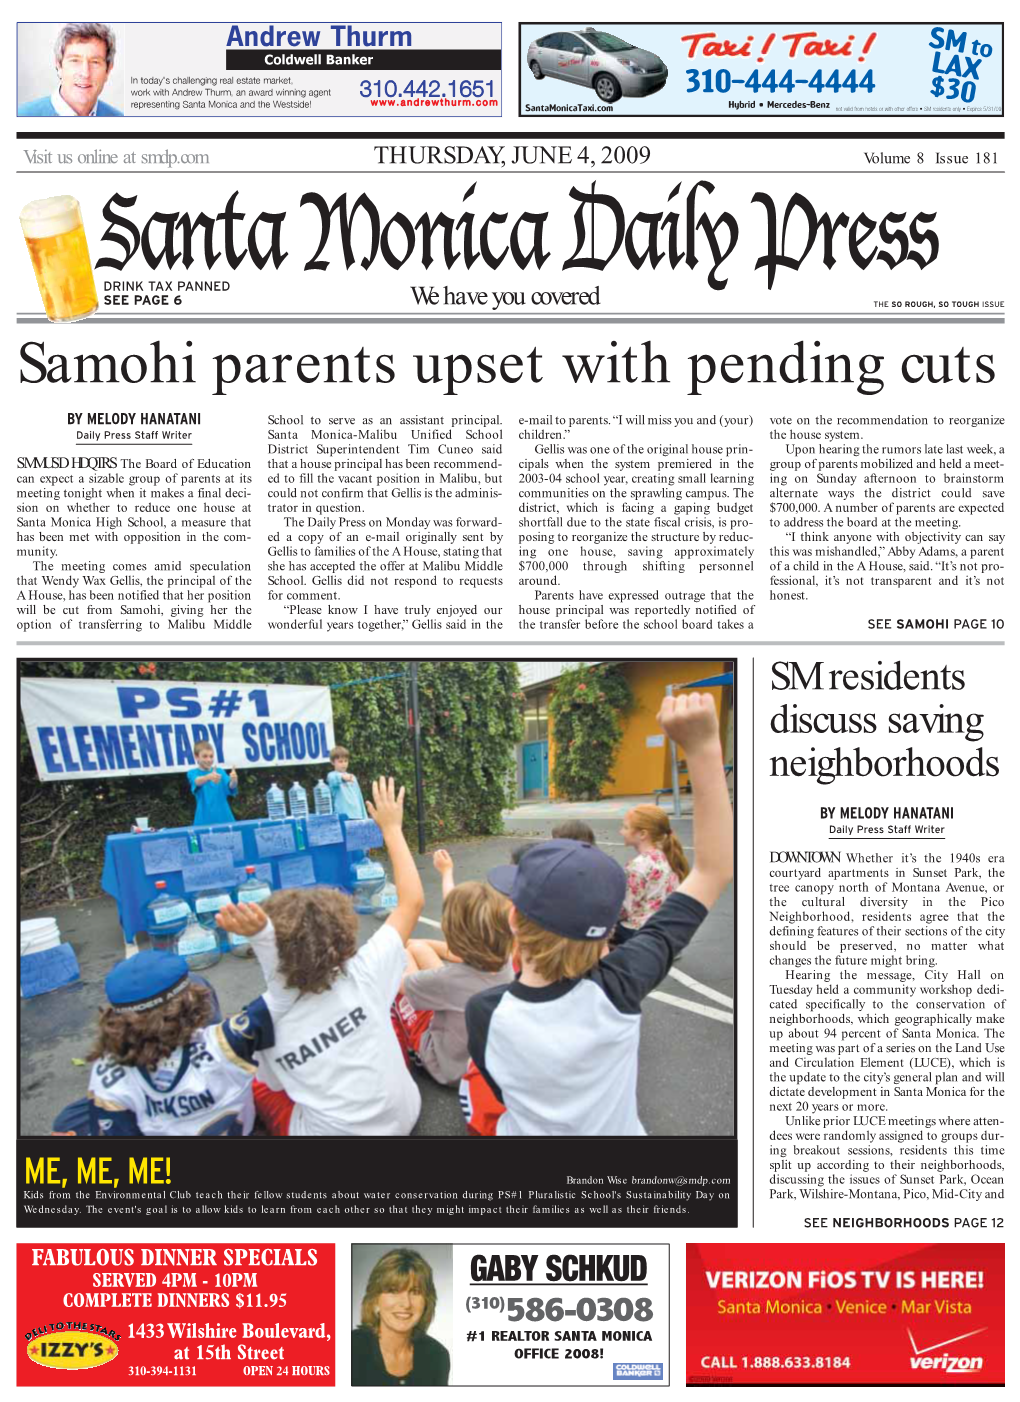 Samohi Parents Upset with Pending Cuts